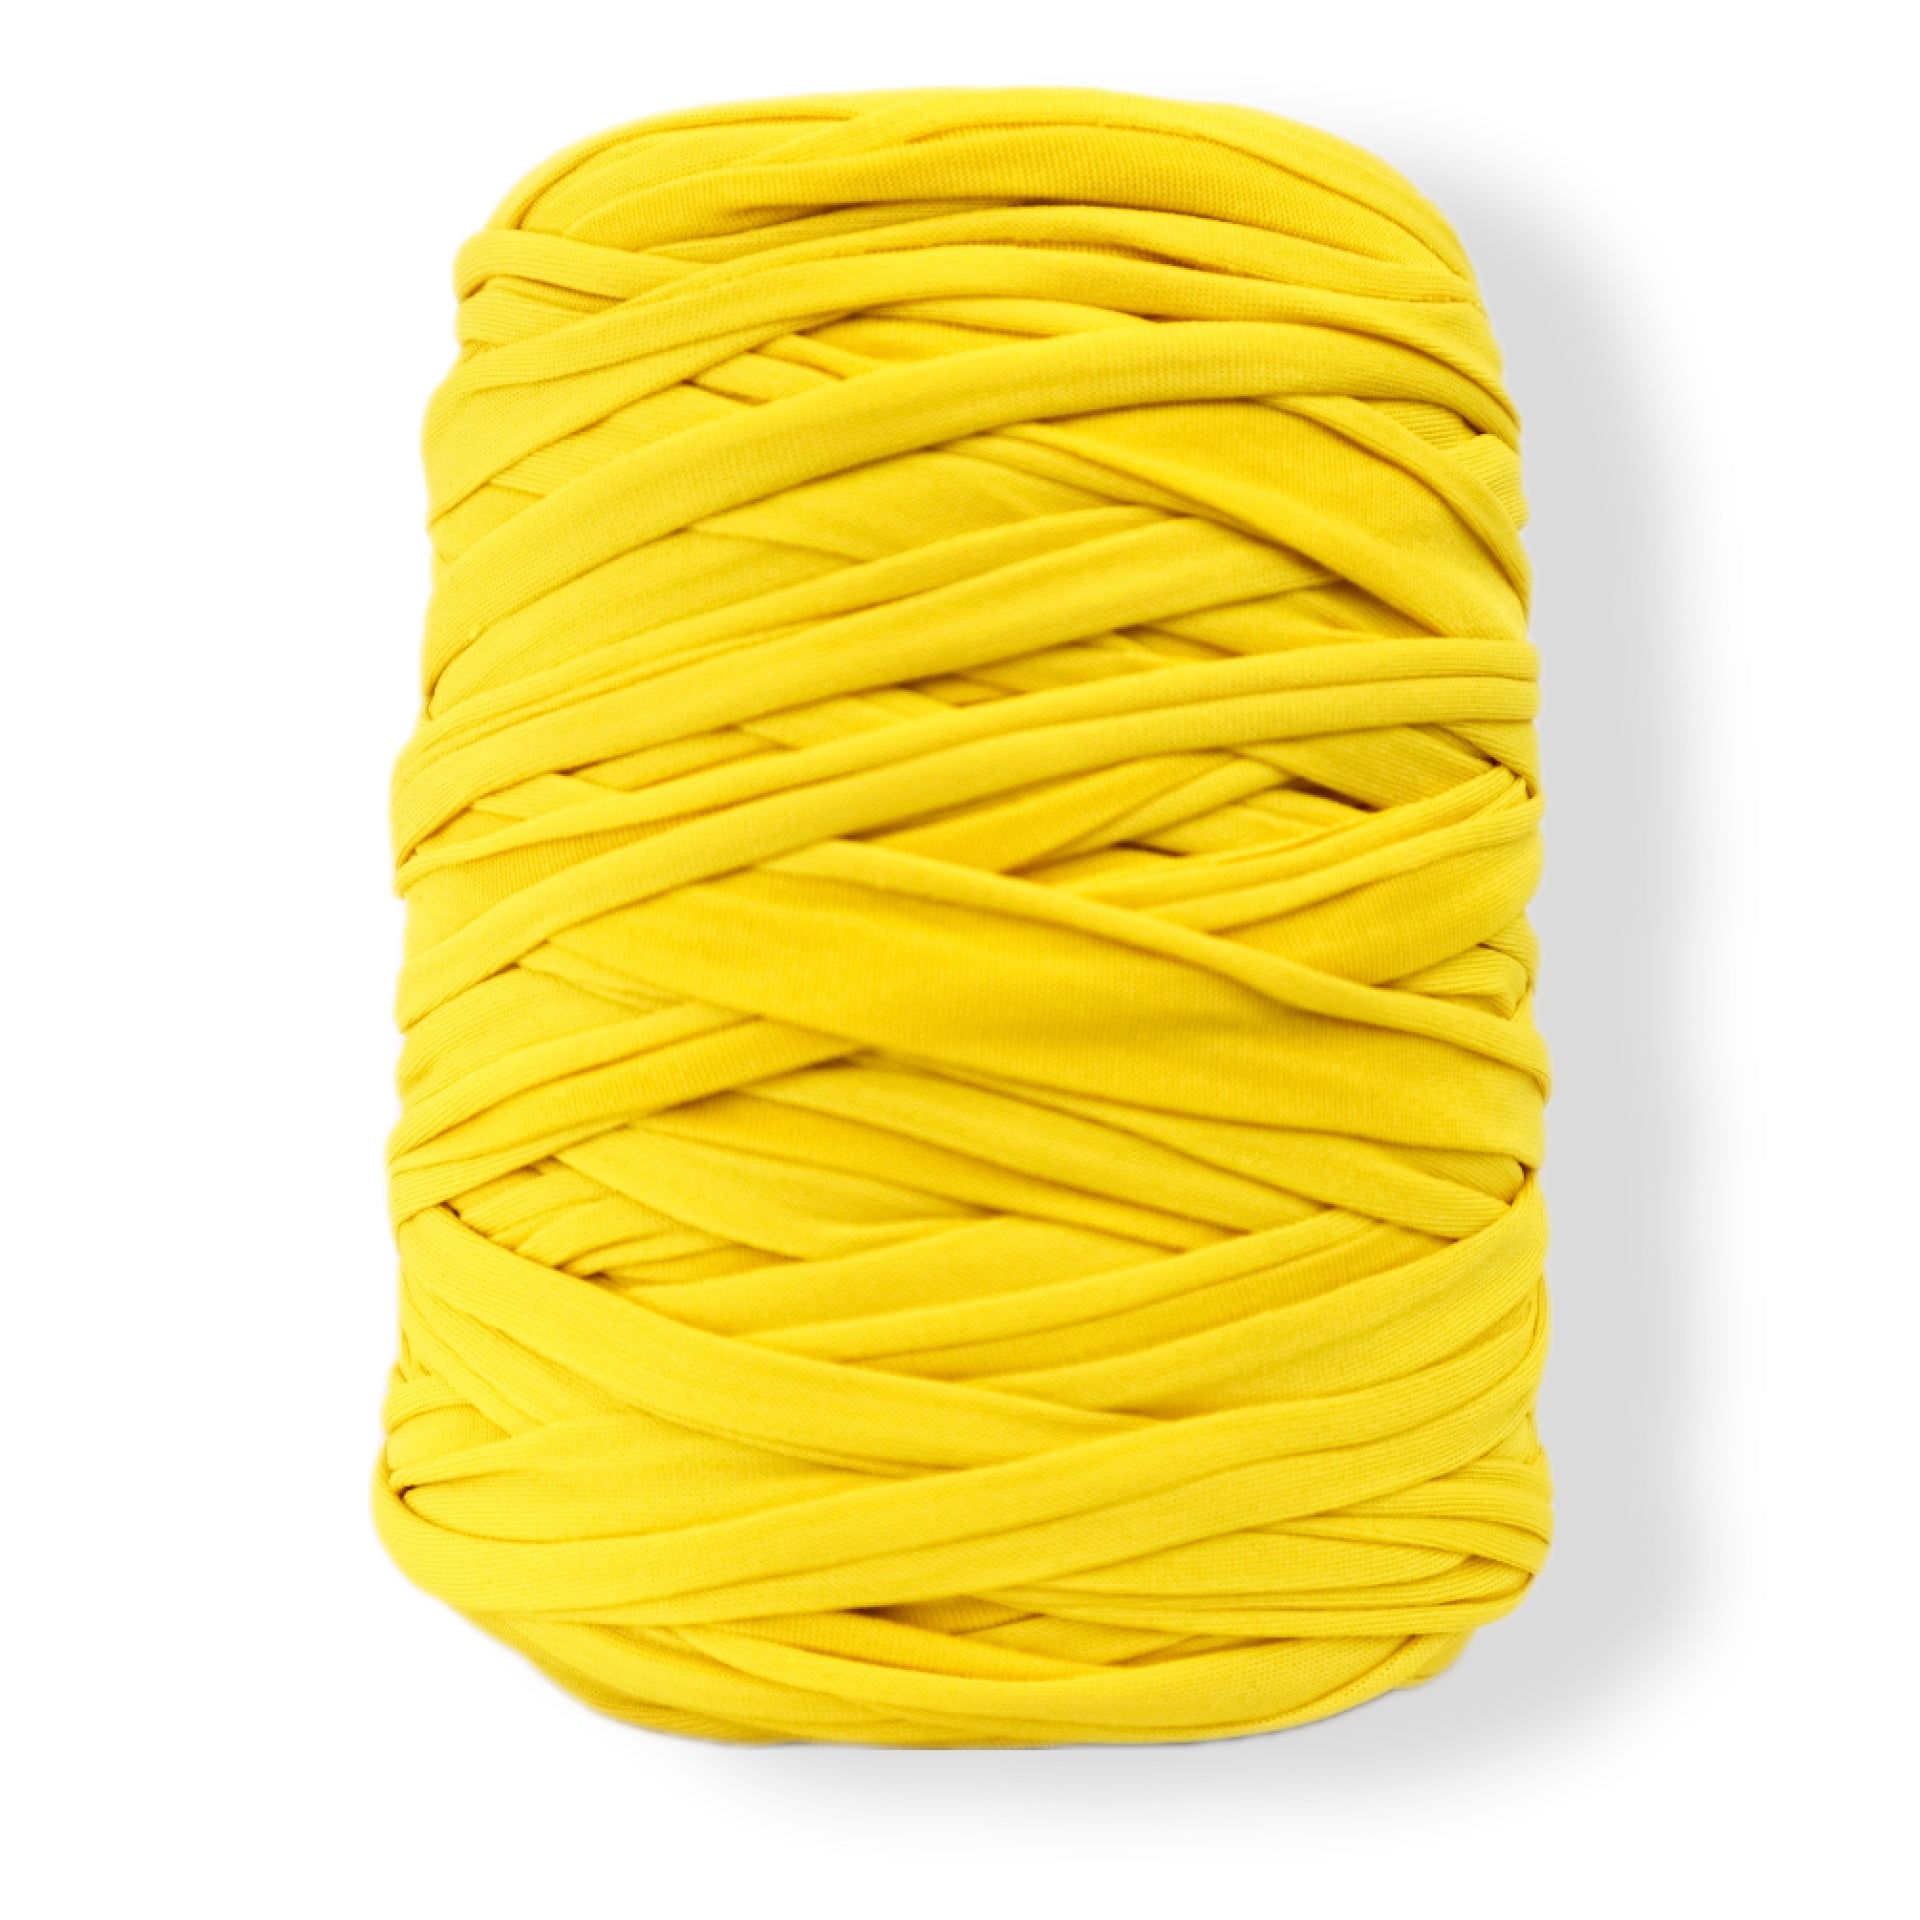 T-Shirt Yarn, Over 300 Feet, Very Soft Polyester Elastic Non